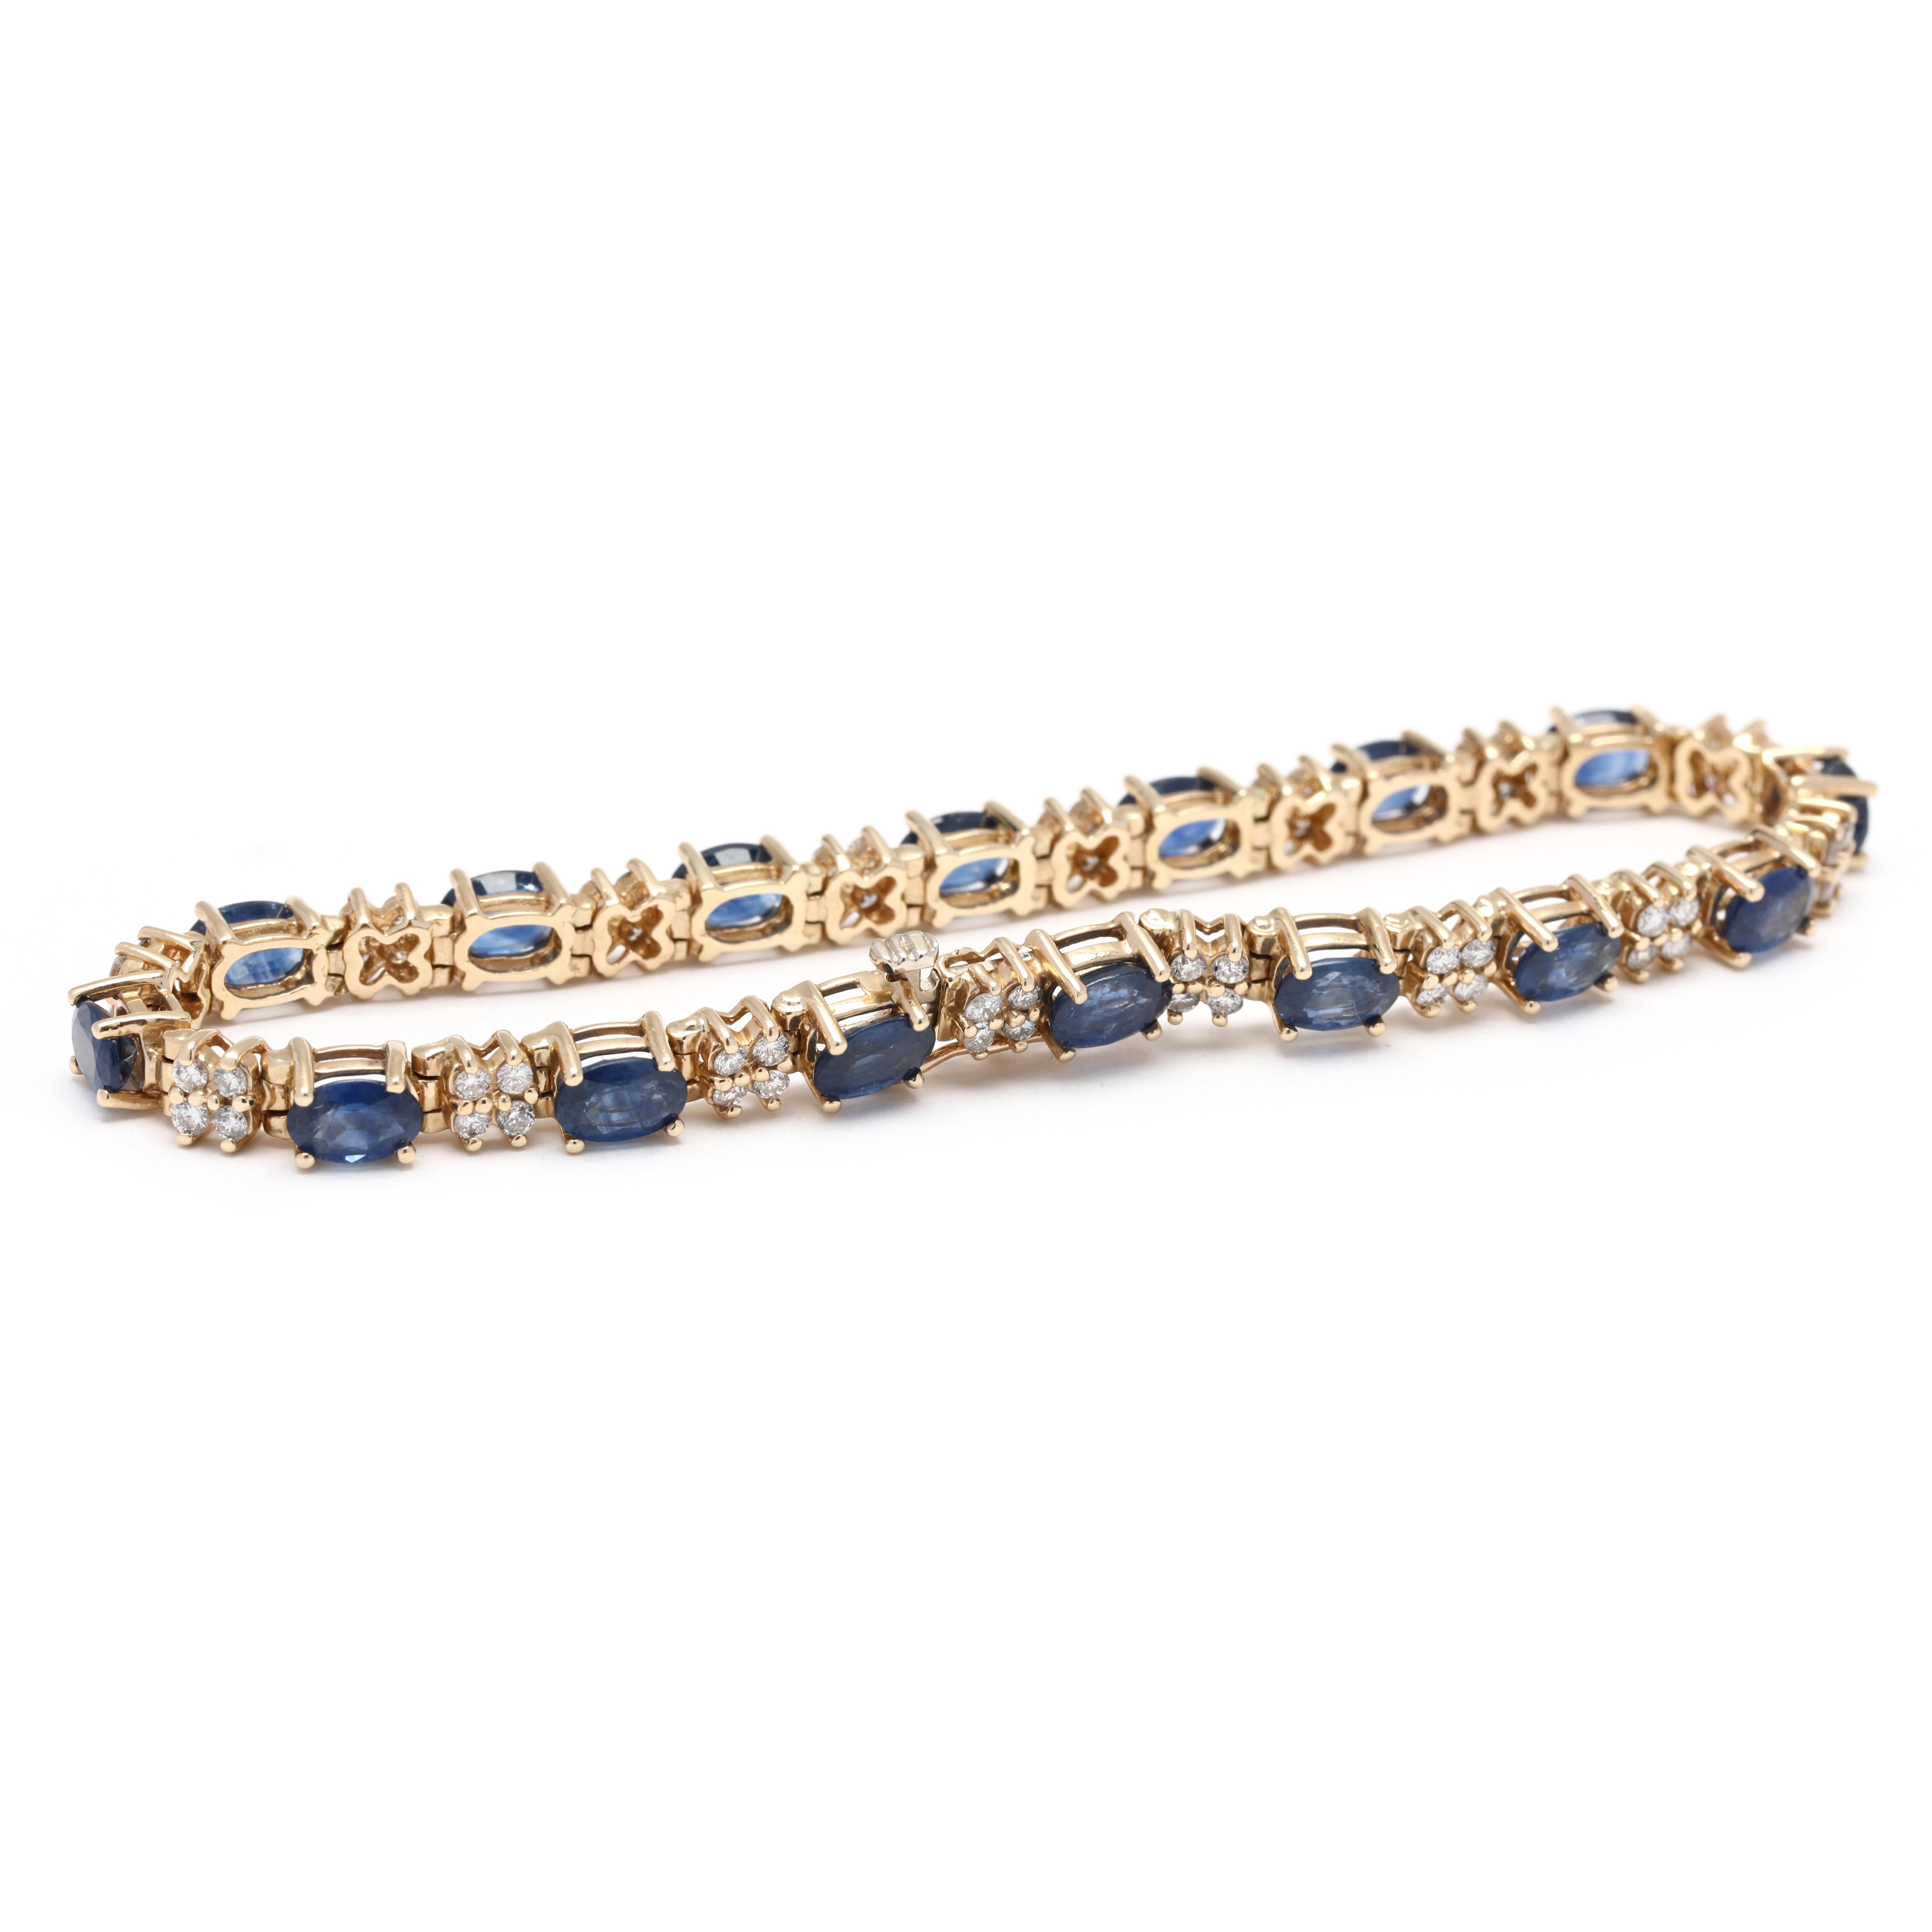 This stunning 12.55ctw Blue Sapphire Diamond Tennis Bracelet is a true showstopper. Crafted from 14K yellow gold, this bracelet features a stunning array of blue sapphire gemstones that are elegantly accented by sparkling diamonds. The total carat